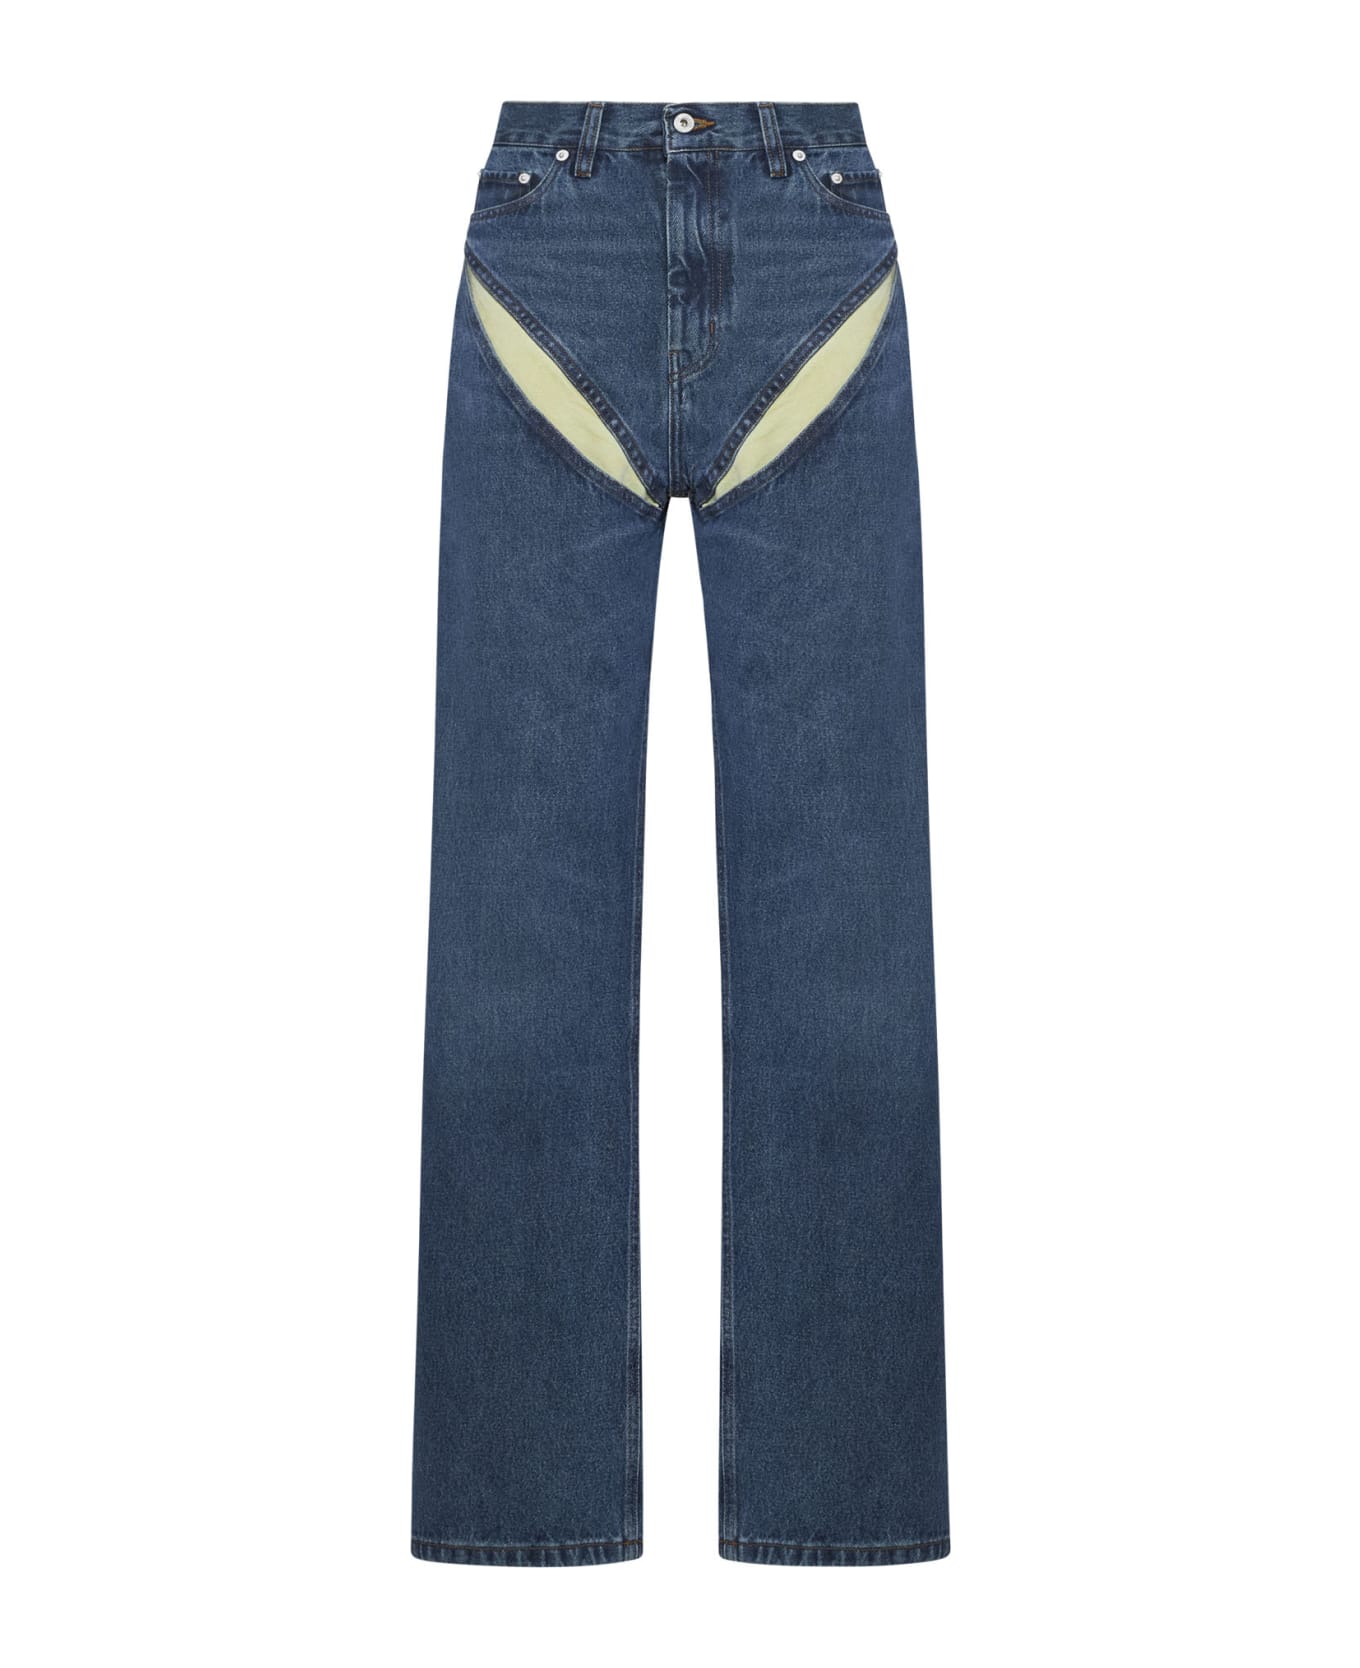 Y/Project Jeans - Evergreen vintage blue デニム